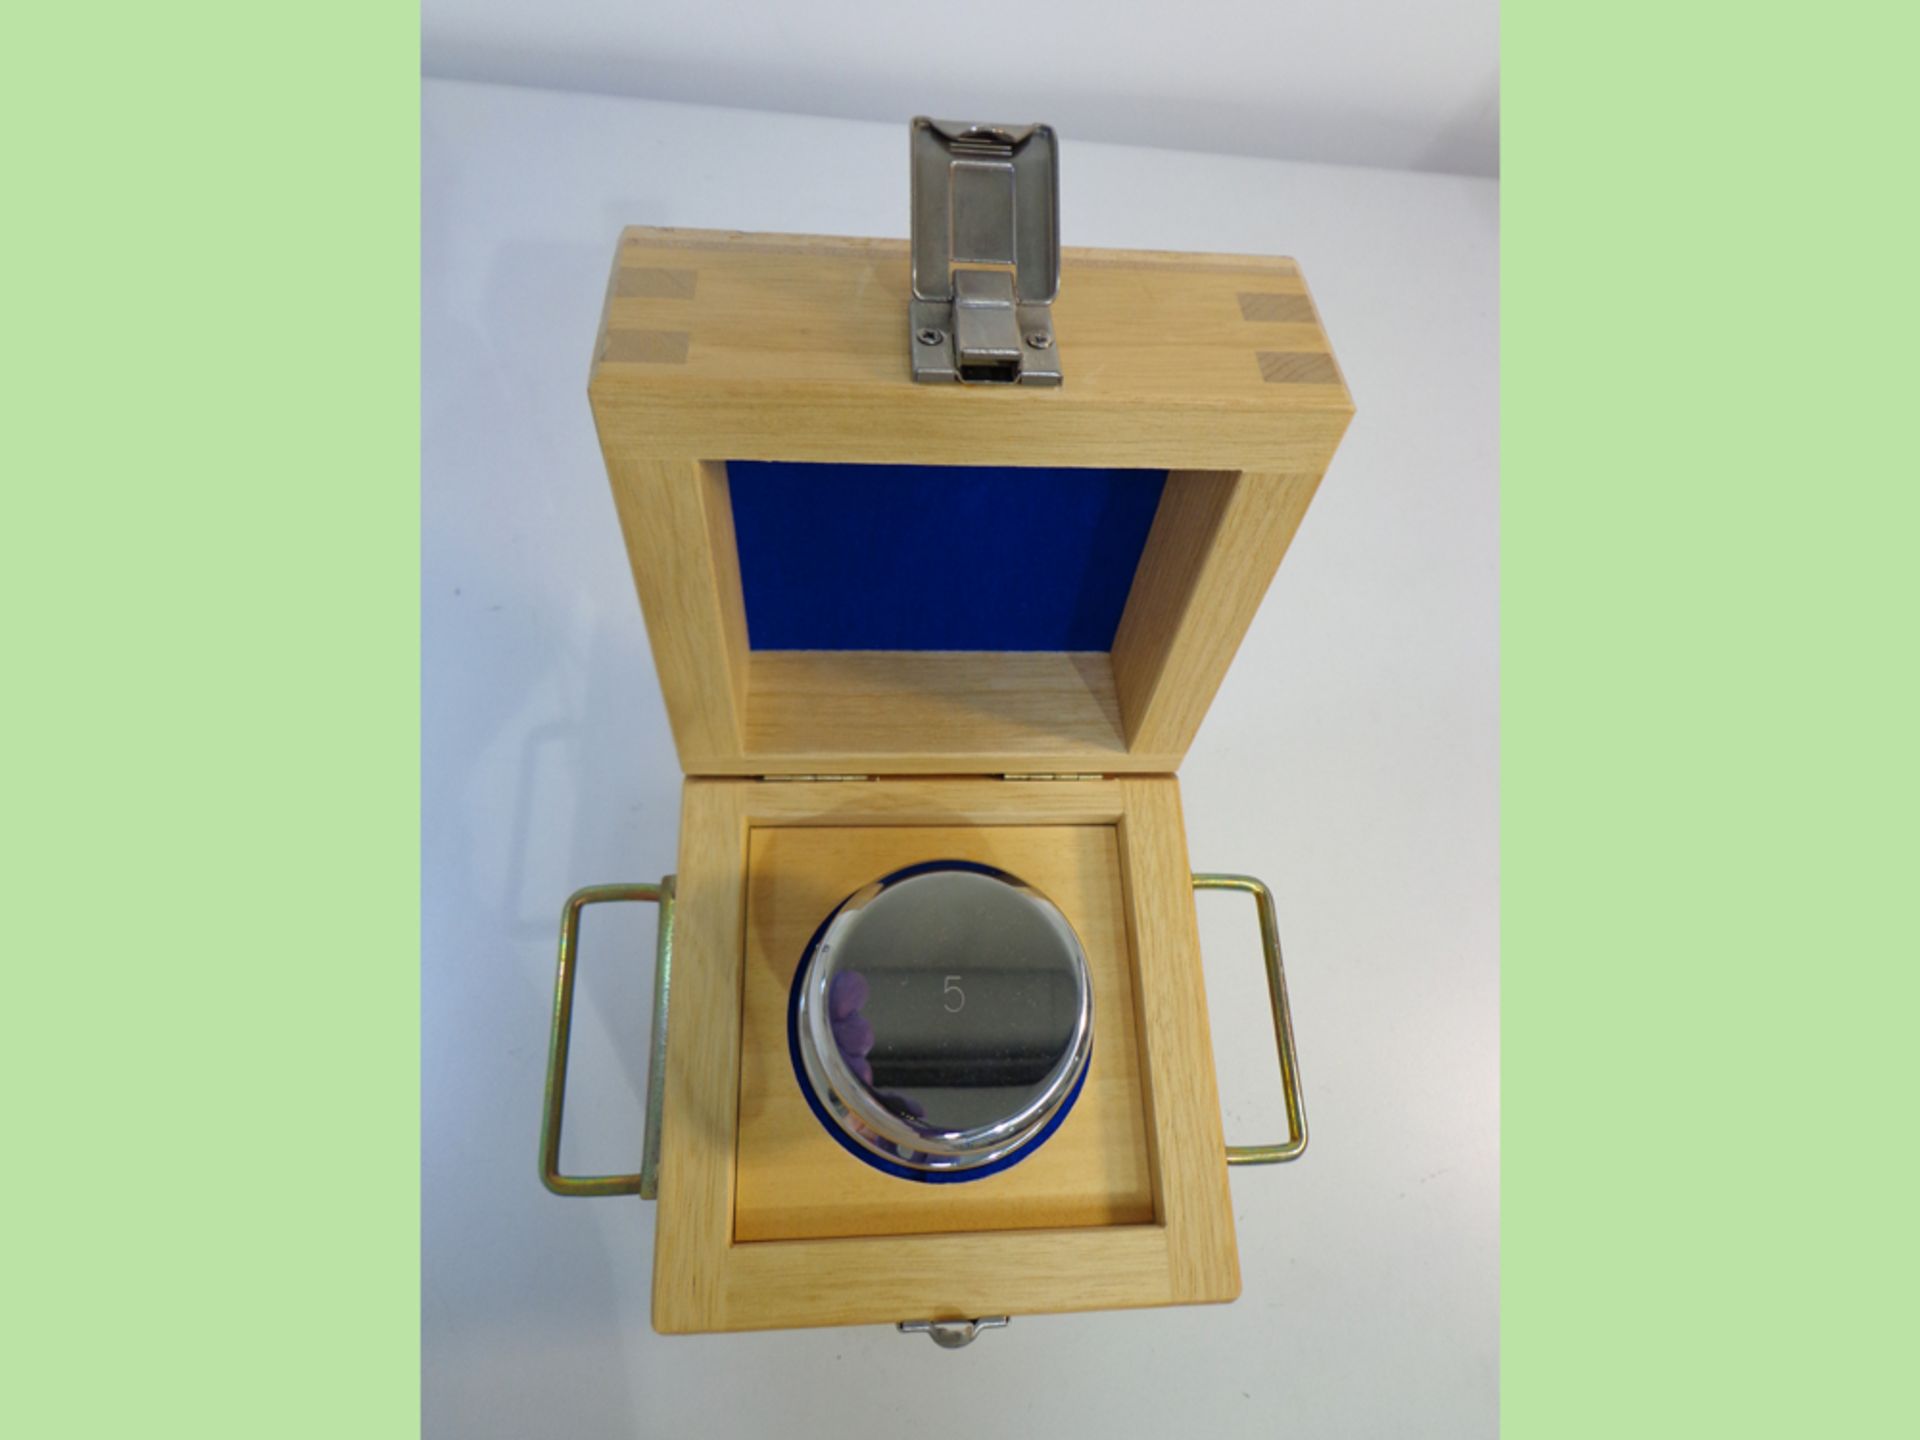 Mettler Toledo Single 5kg F1 Stainless Steel Calibration Weight, in Wooden Box, Ref 15871 - Image 2 of 4